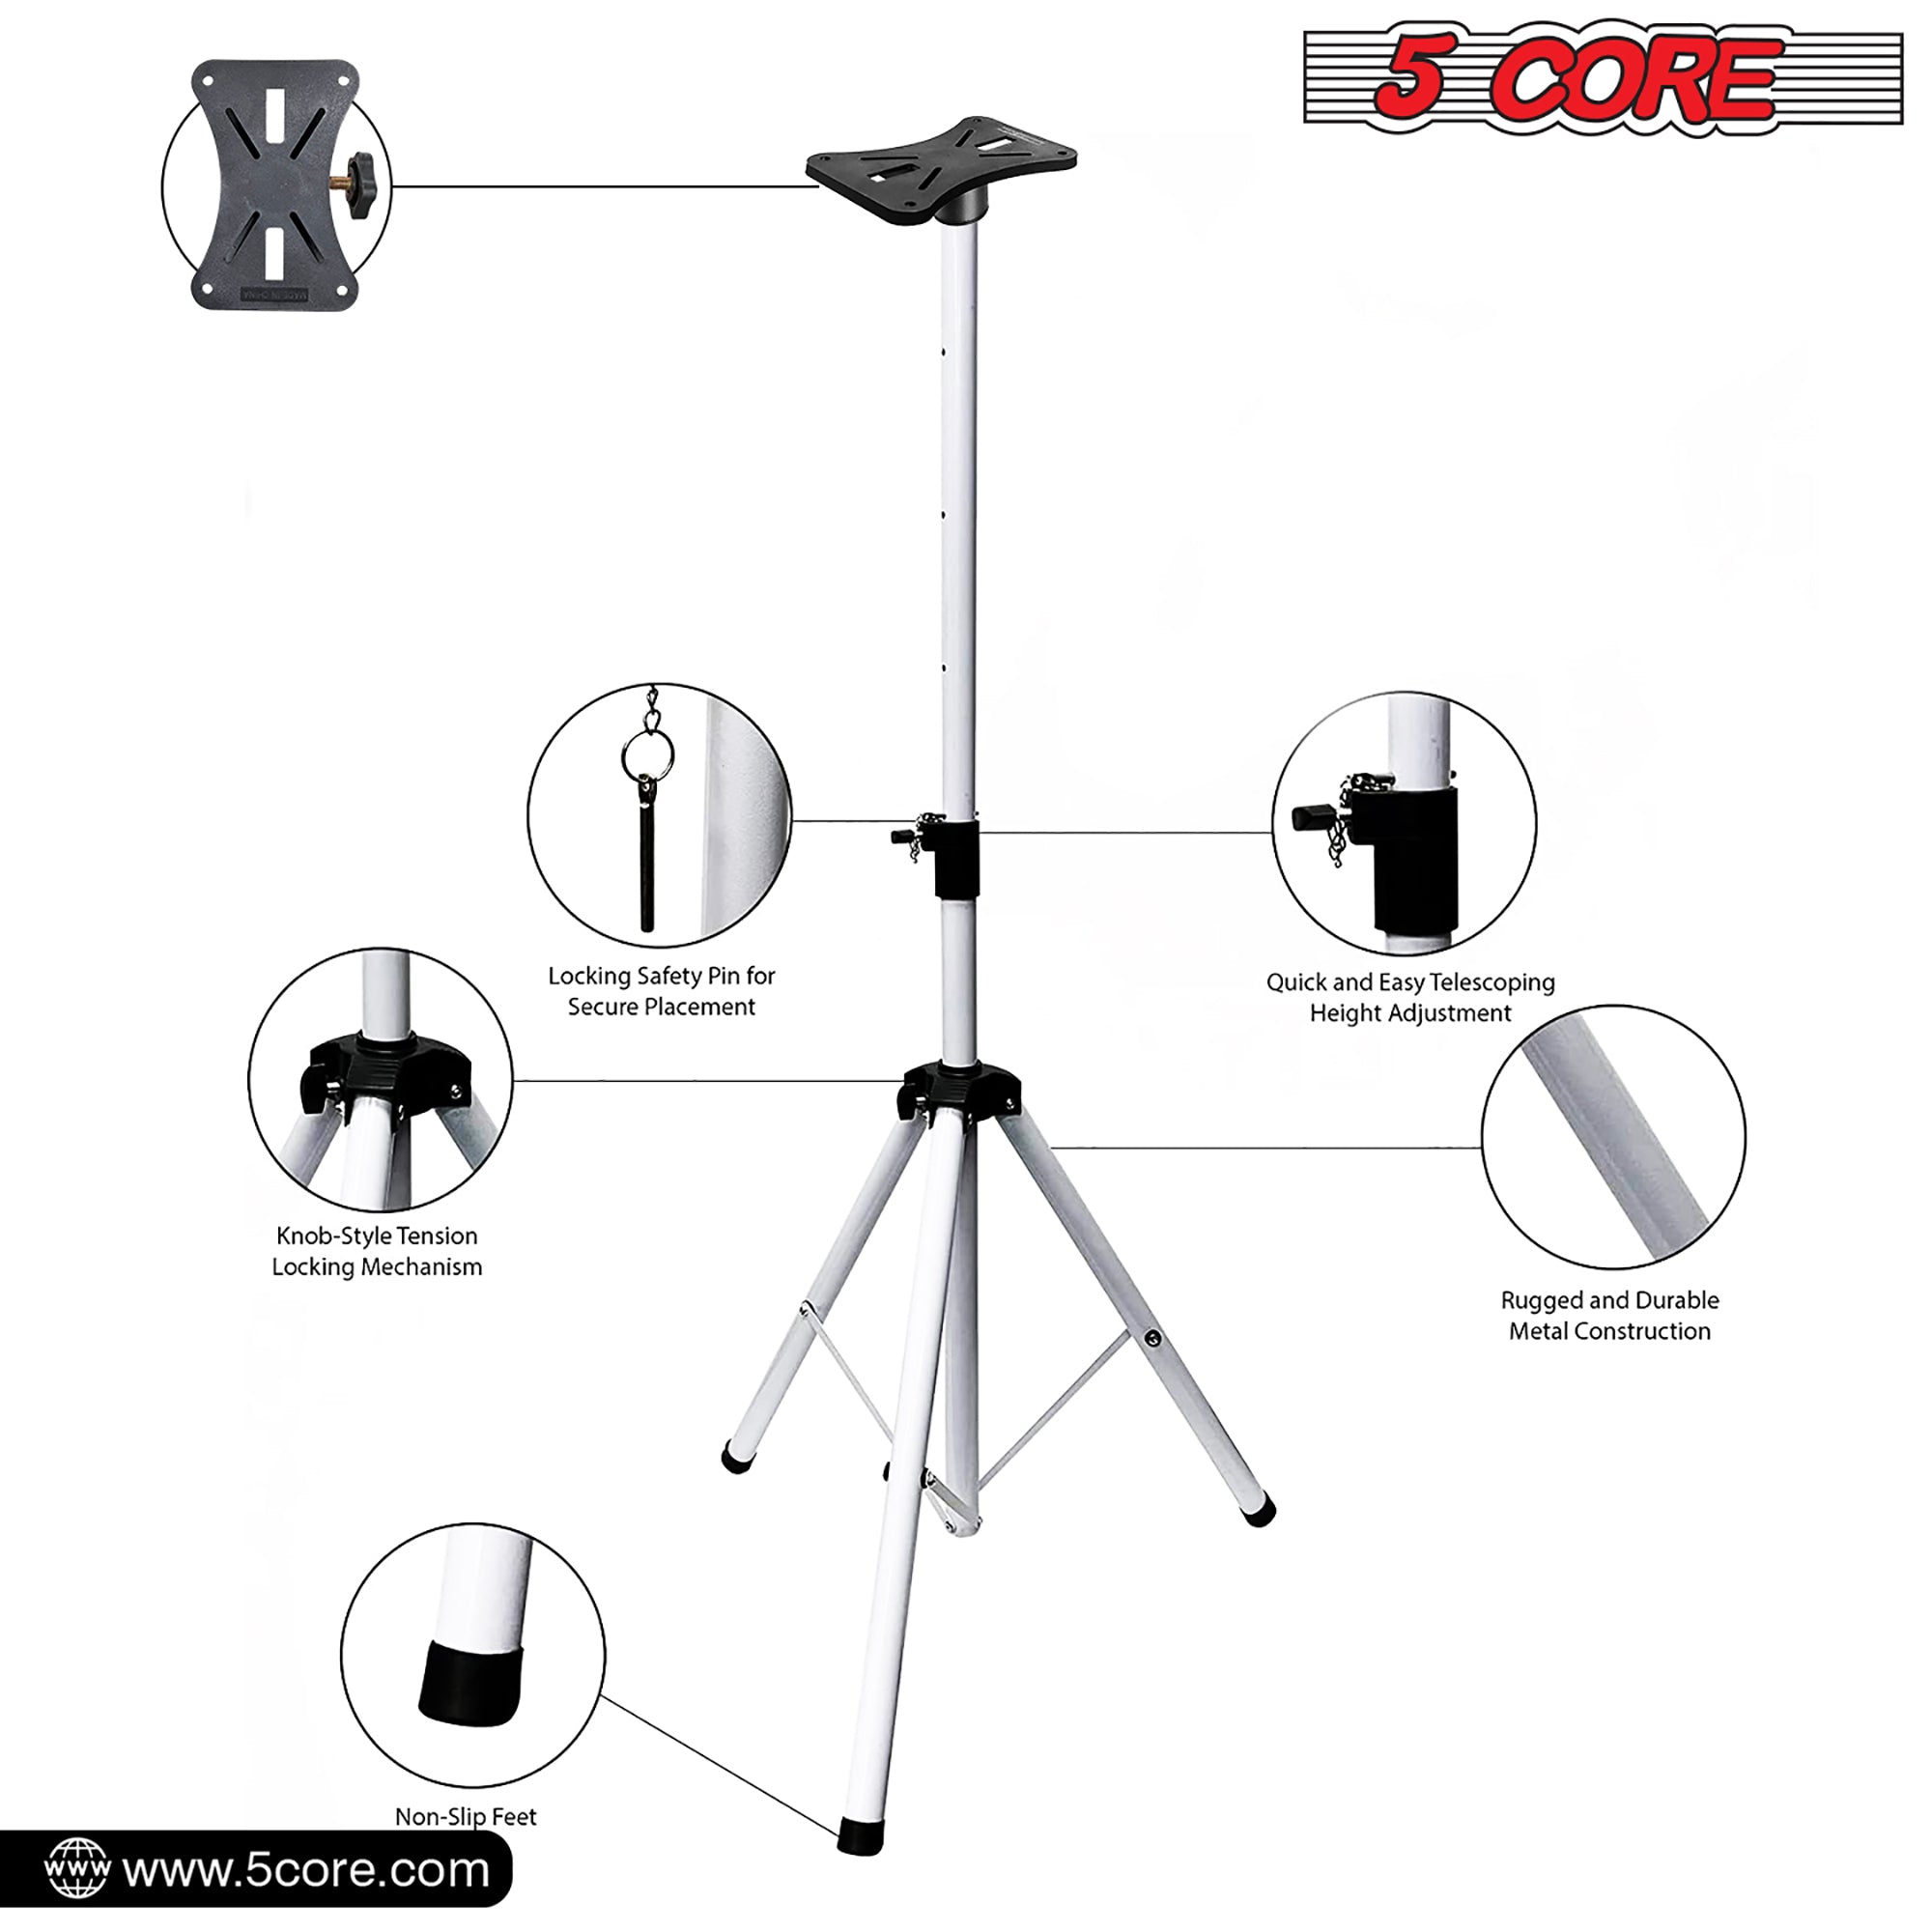 5 Core speaker Stand 2 Pieces Subwoofer Stands White Height Adjustable Light Weight Studio PA Speaker Holder for Large Speakers w Locking Safety PIN and 35mm Compatible Insert On Stage In Studio Use - SS ECO 2PK WH WoB